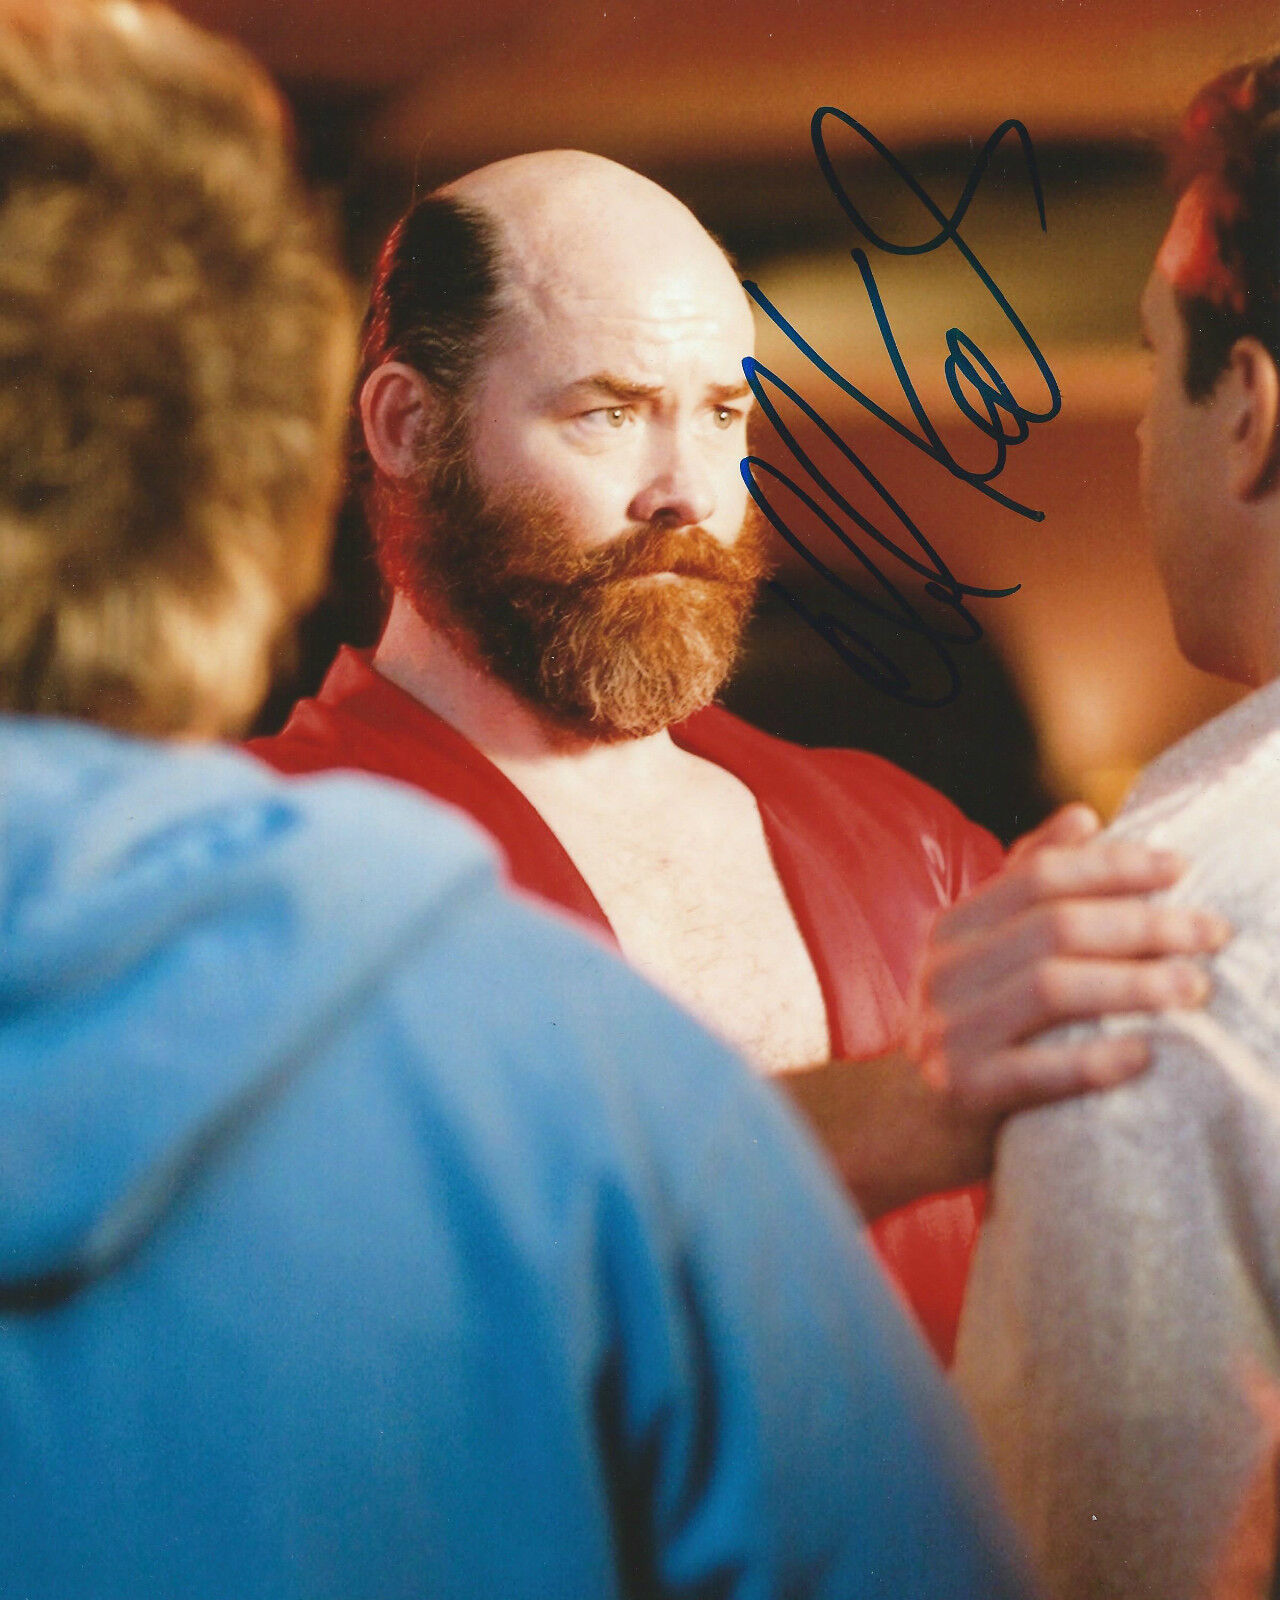 **GFA A Good Old Fashioned Orgy *DAVID KOECHNER* Signed 8x10 Photo Poster painting PROOF COA**